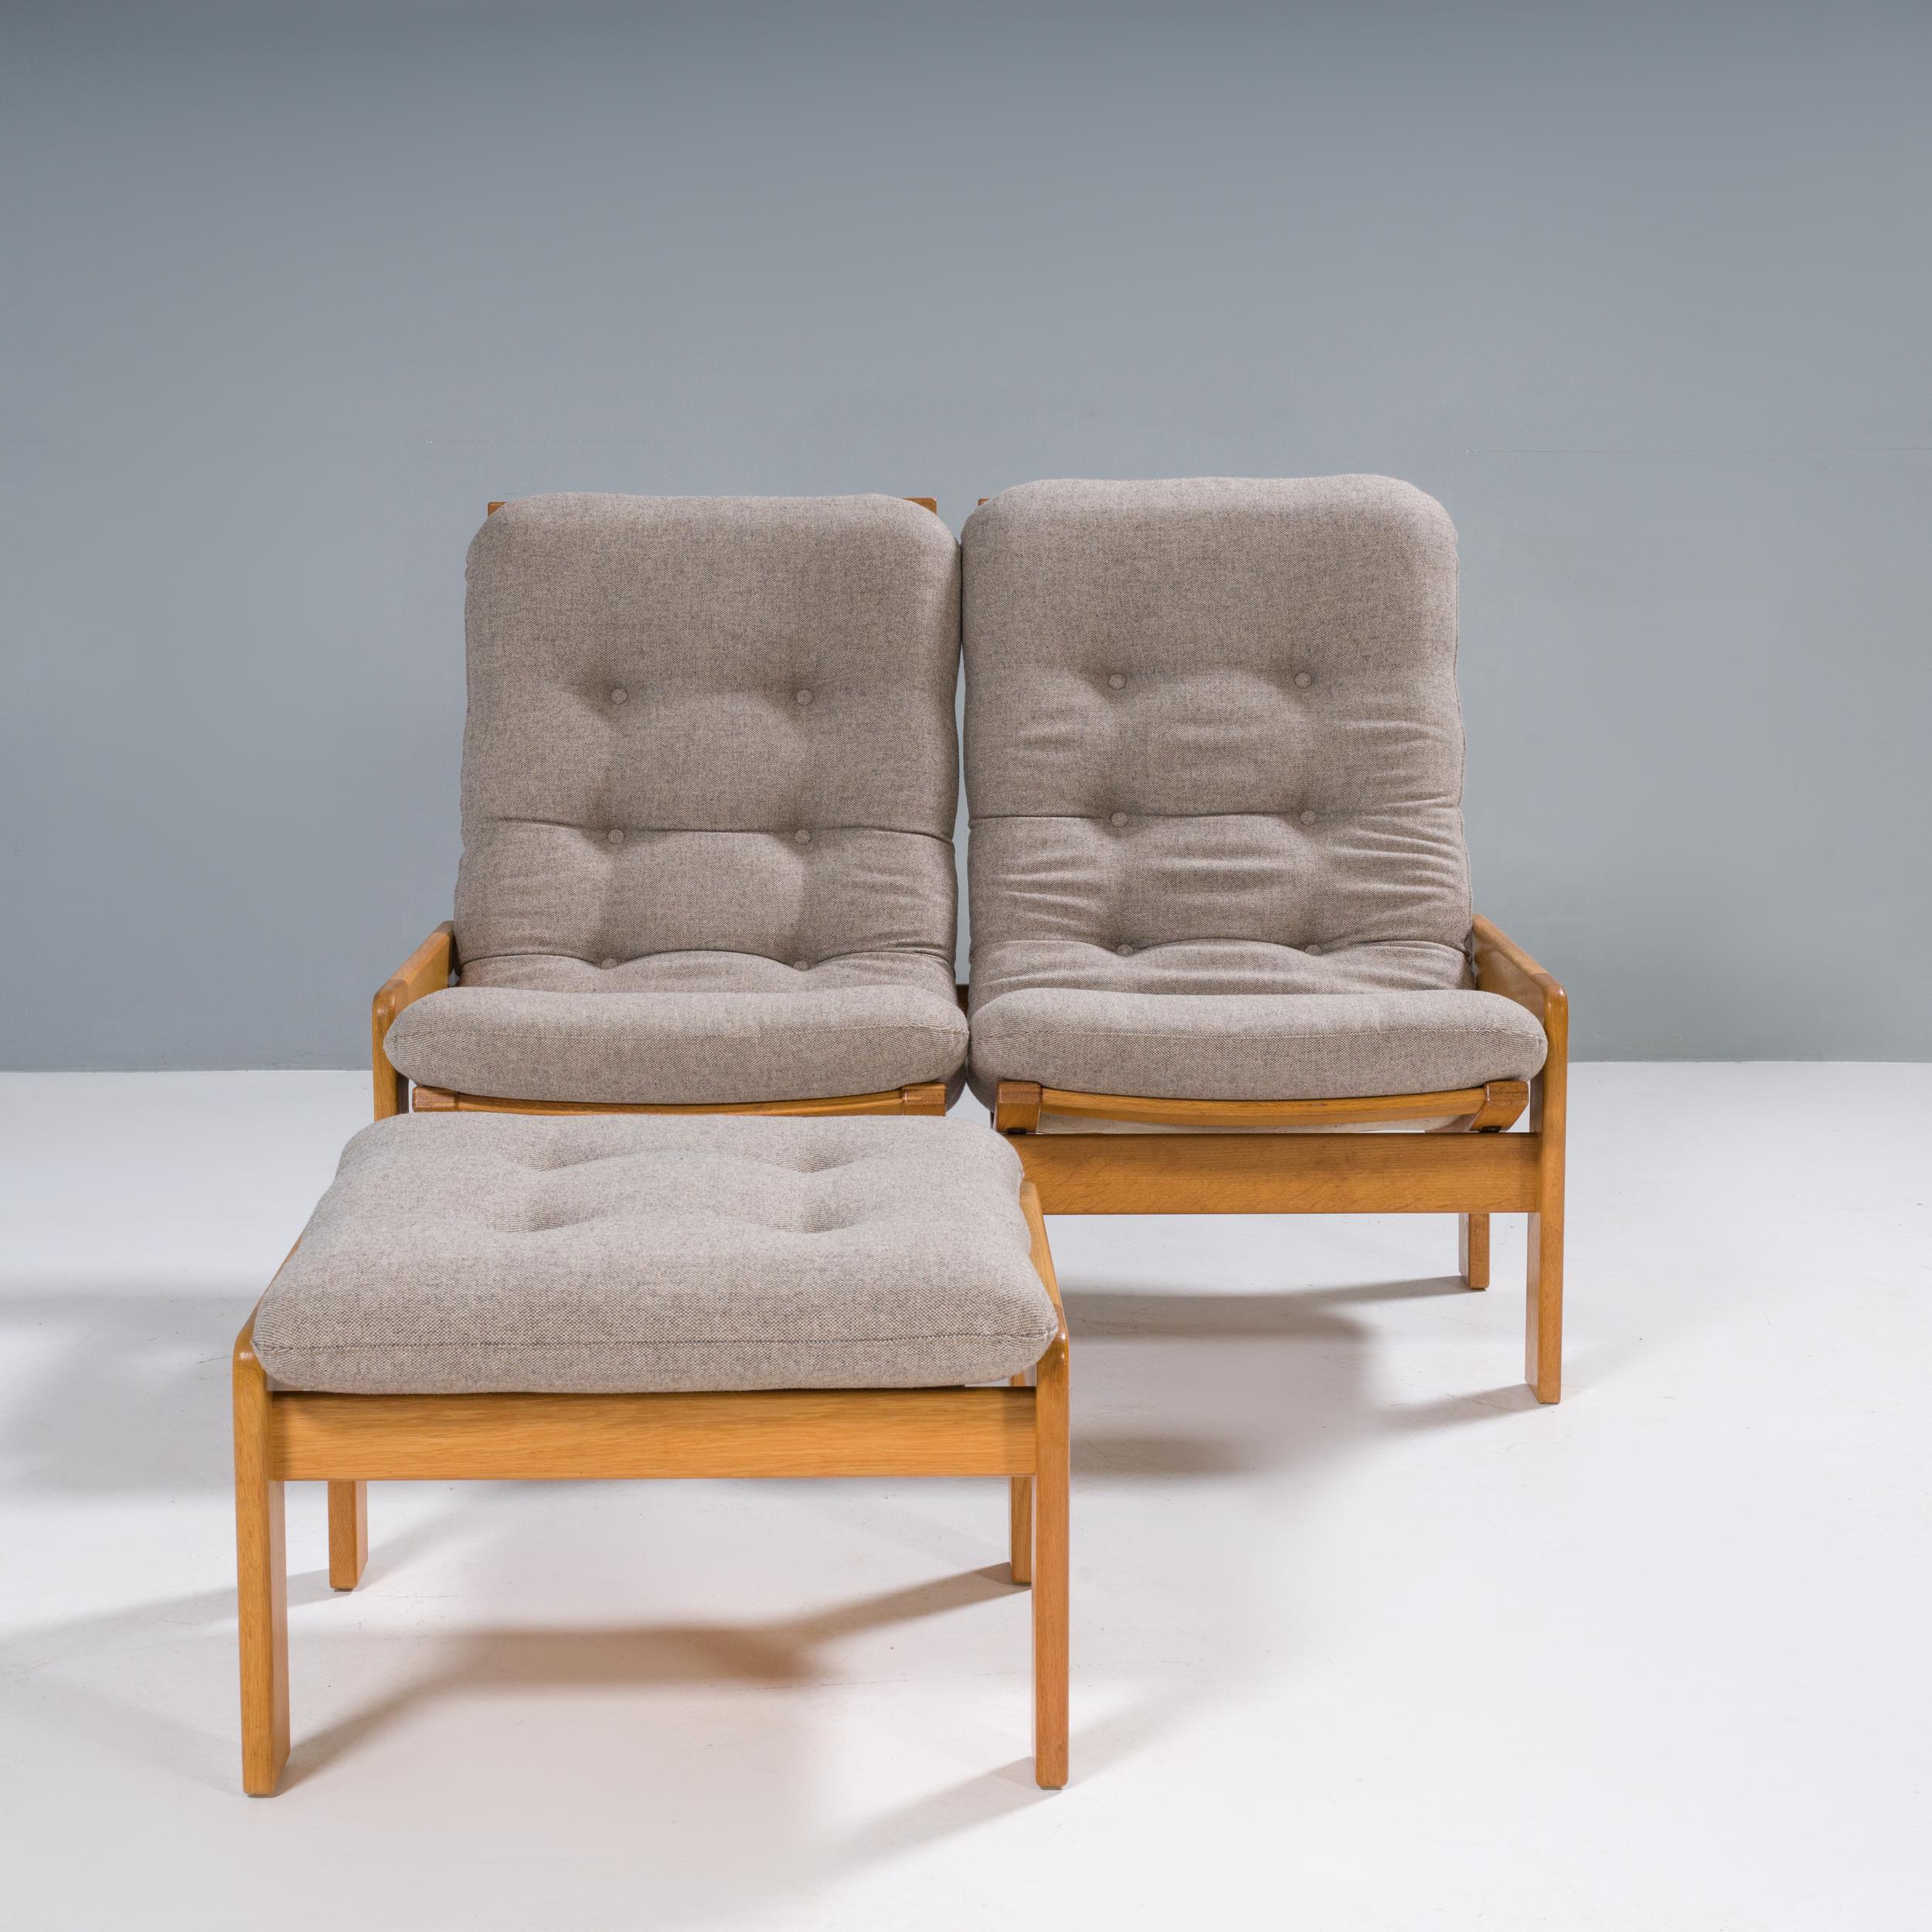 Yngve Ekström was one of the most important figures in the evolution of the Scandinavian Modernism movement and co-founder of the furniture design company Swedese.

The sofa is formed of two separate seats next to each other with individual seat and